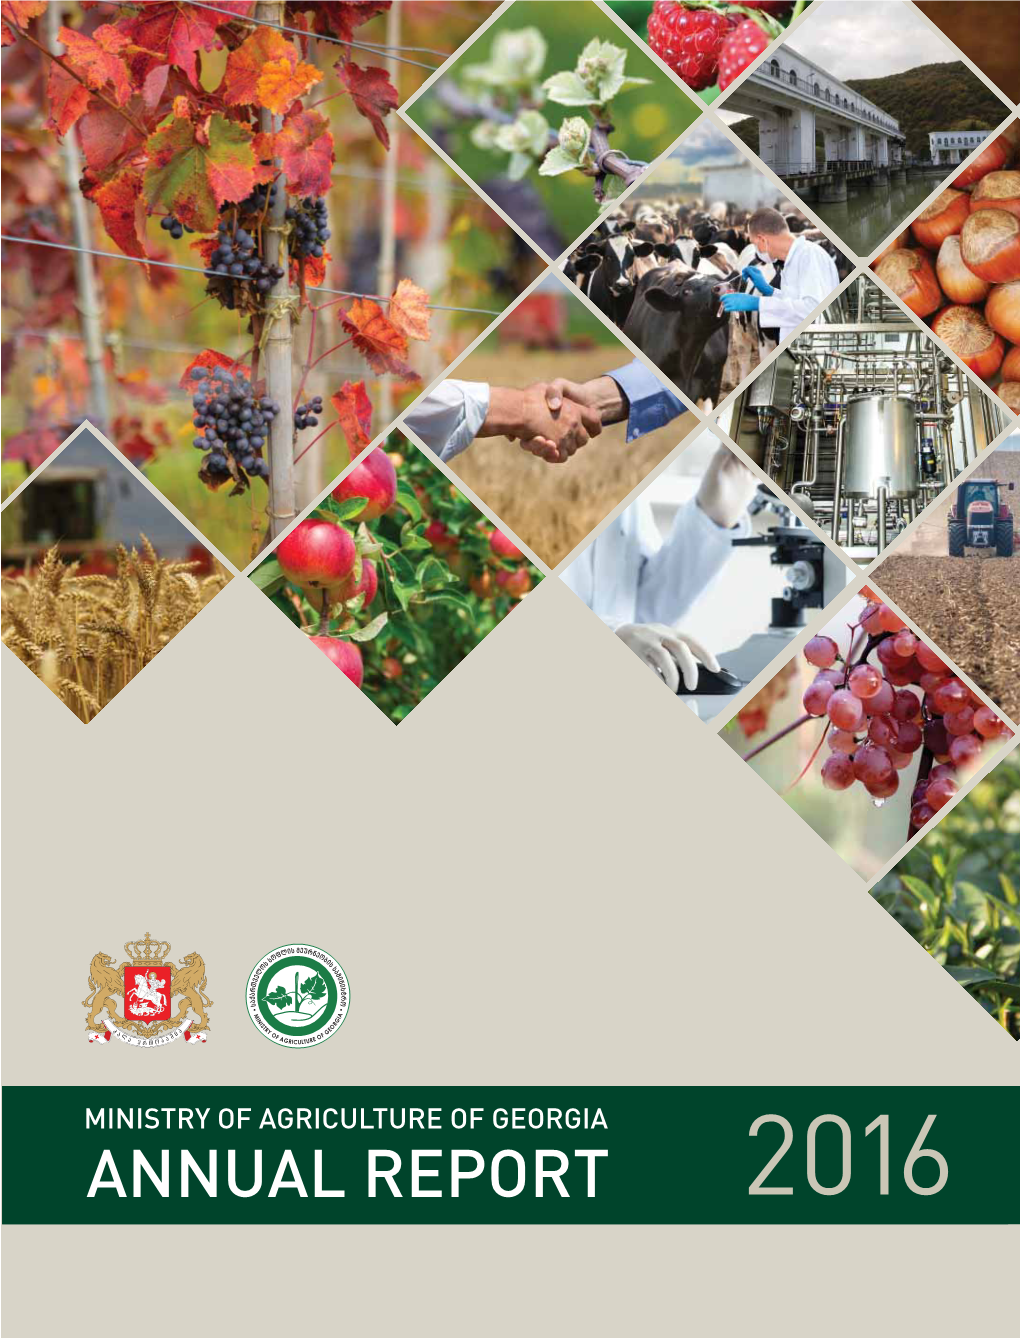 Ministry of Agriculture of Georgia Annual Report